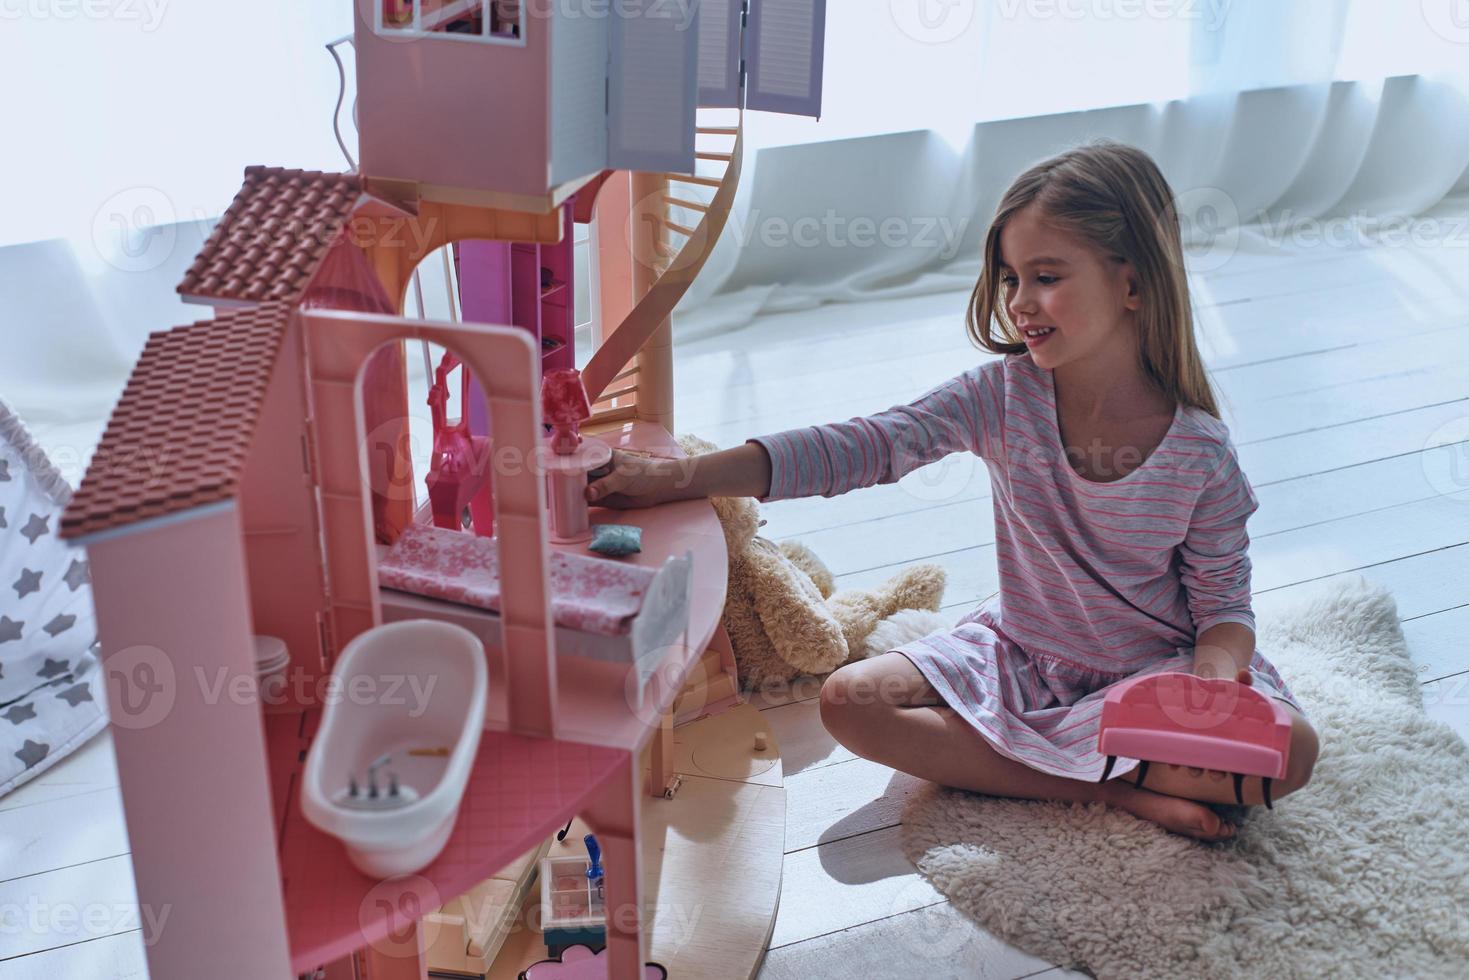 Using fantasy to play. Cute little girl playing with a dollhouse while sitting on the floor in bedroom photo